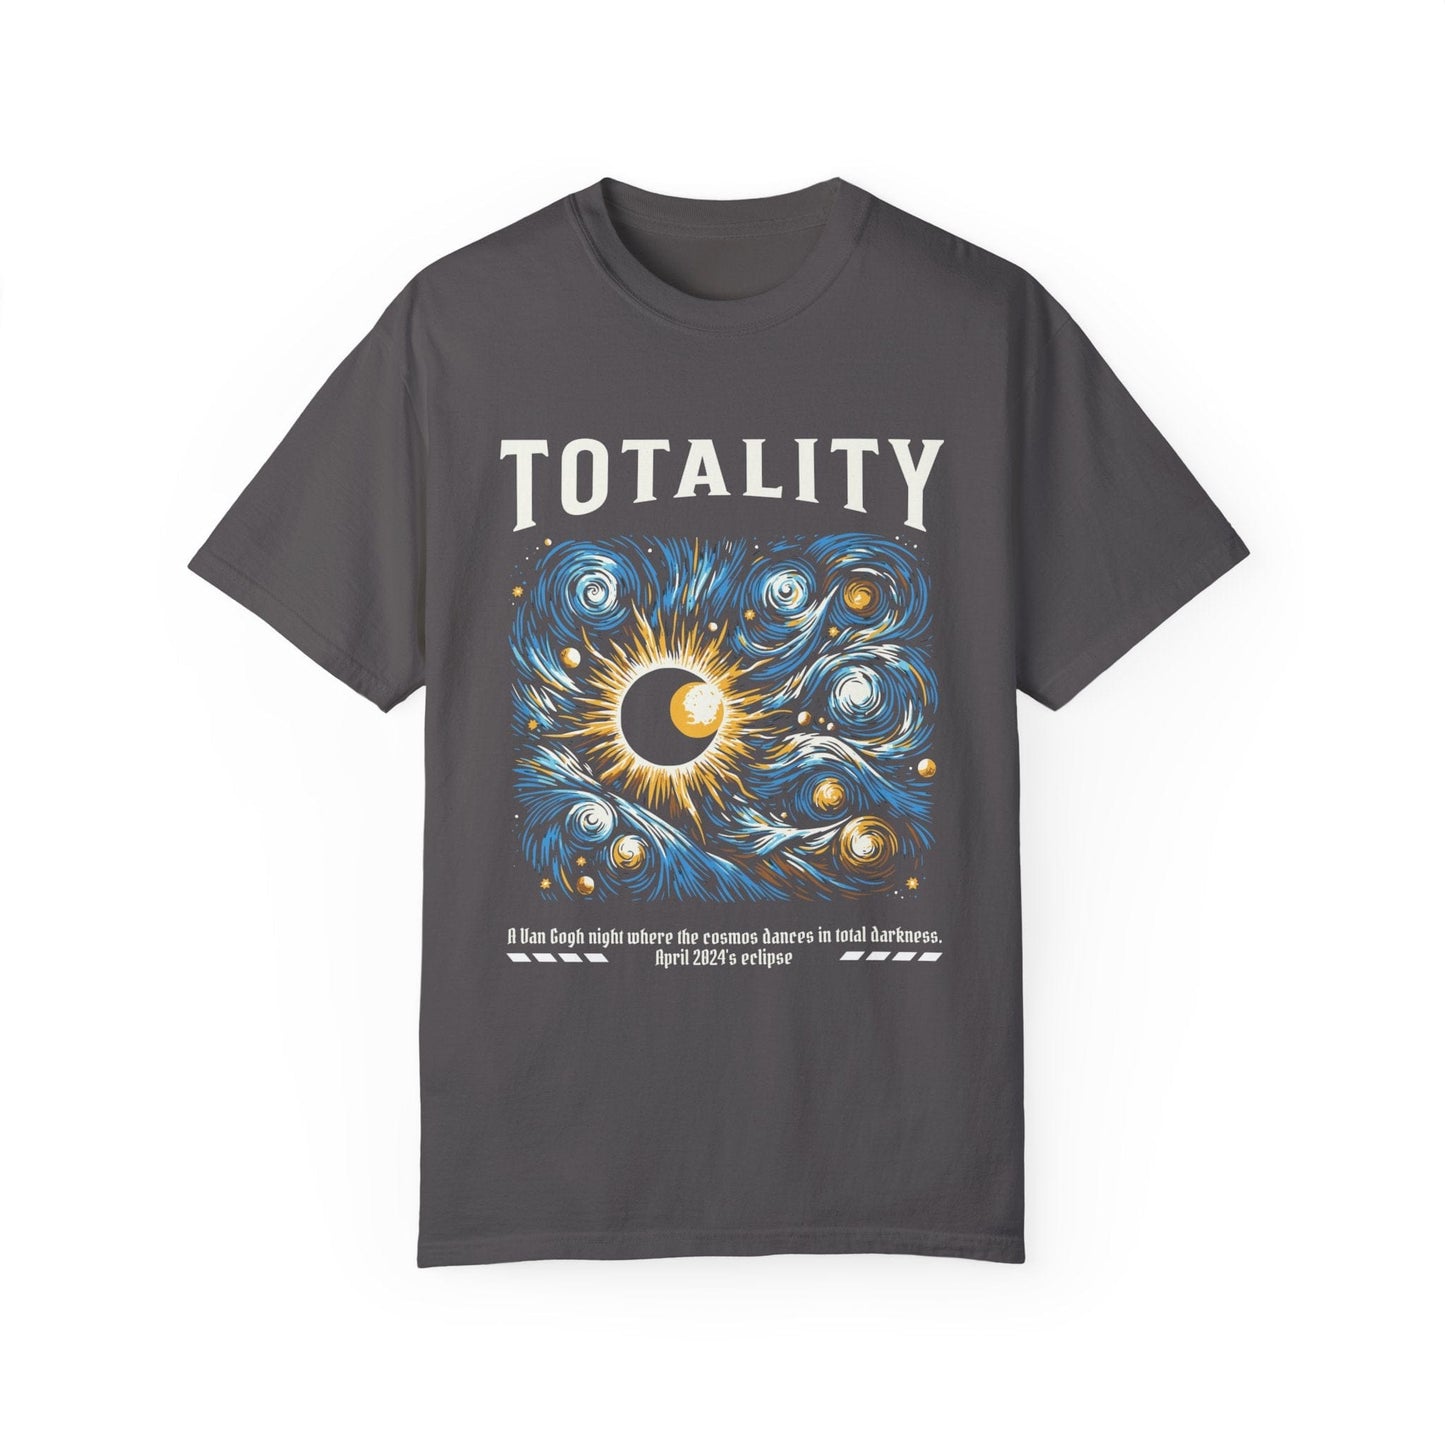 Totality Solar Eclipse 4.08.24 Starry Night Painting Shirt Adult S-4XL - Black/Graphite